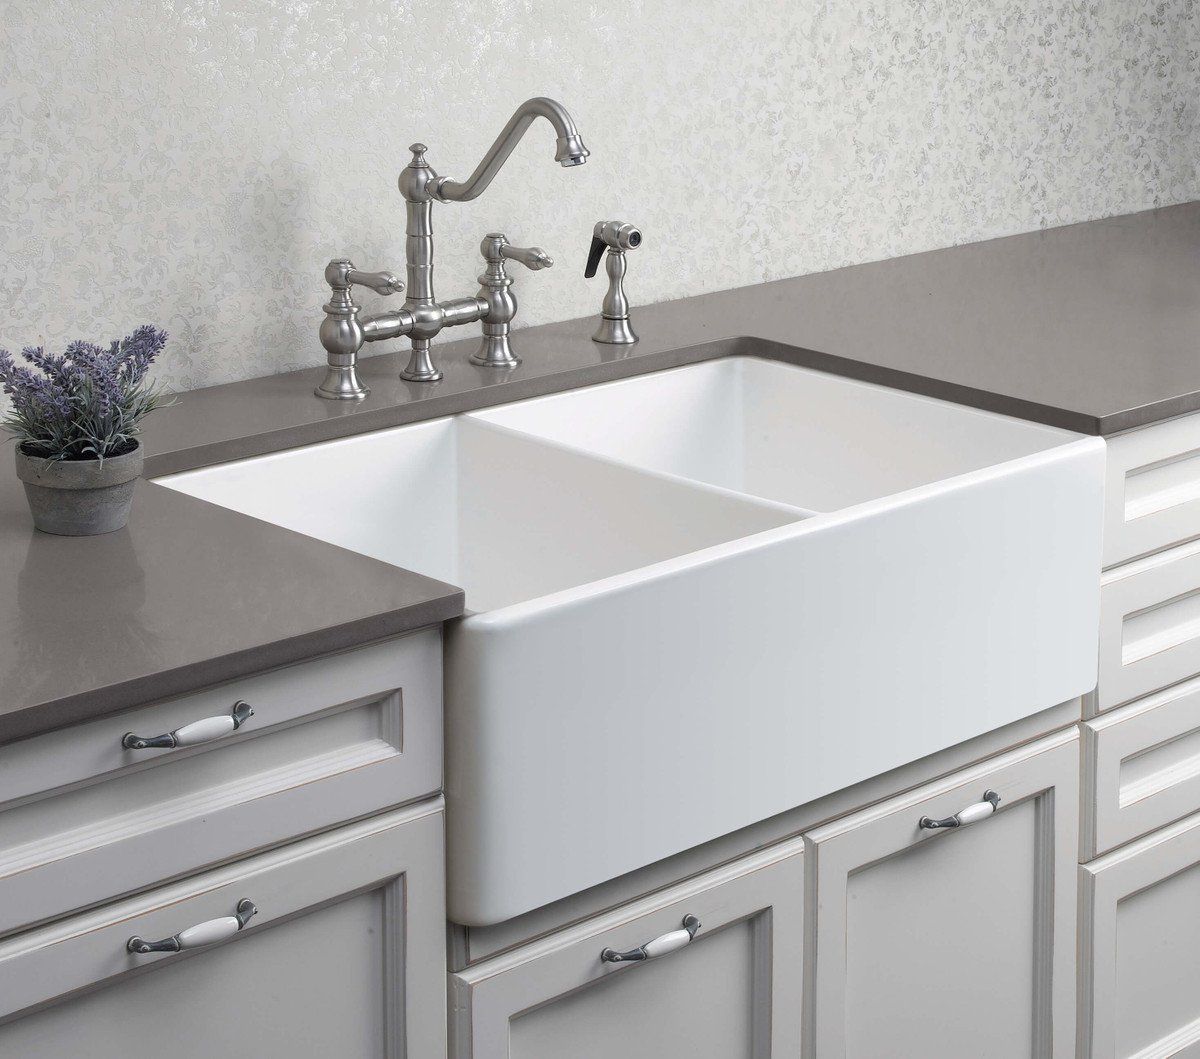 This Butler sink from Restorations Online is a great example of a twin farmhouse sink.